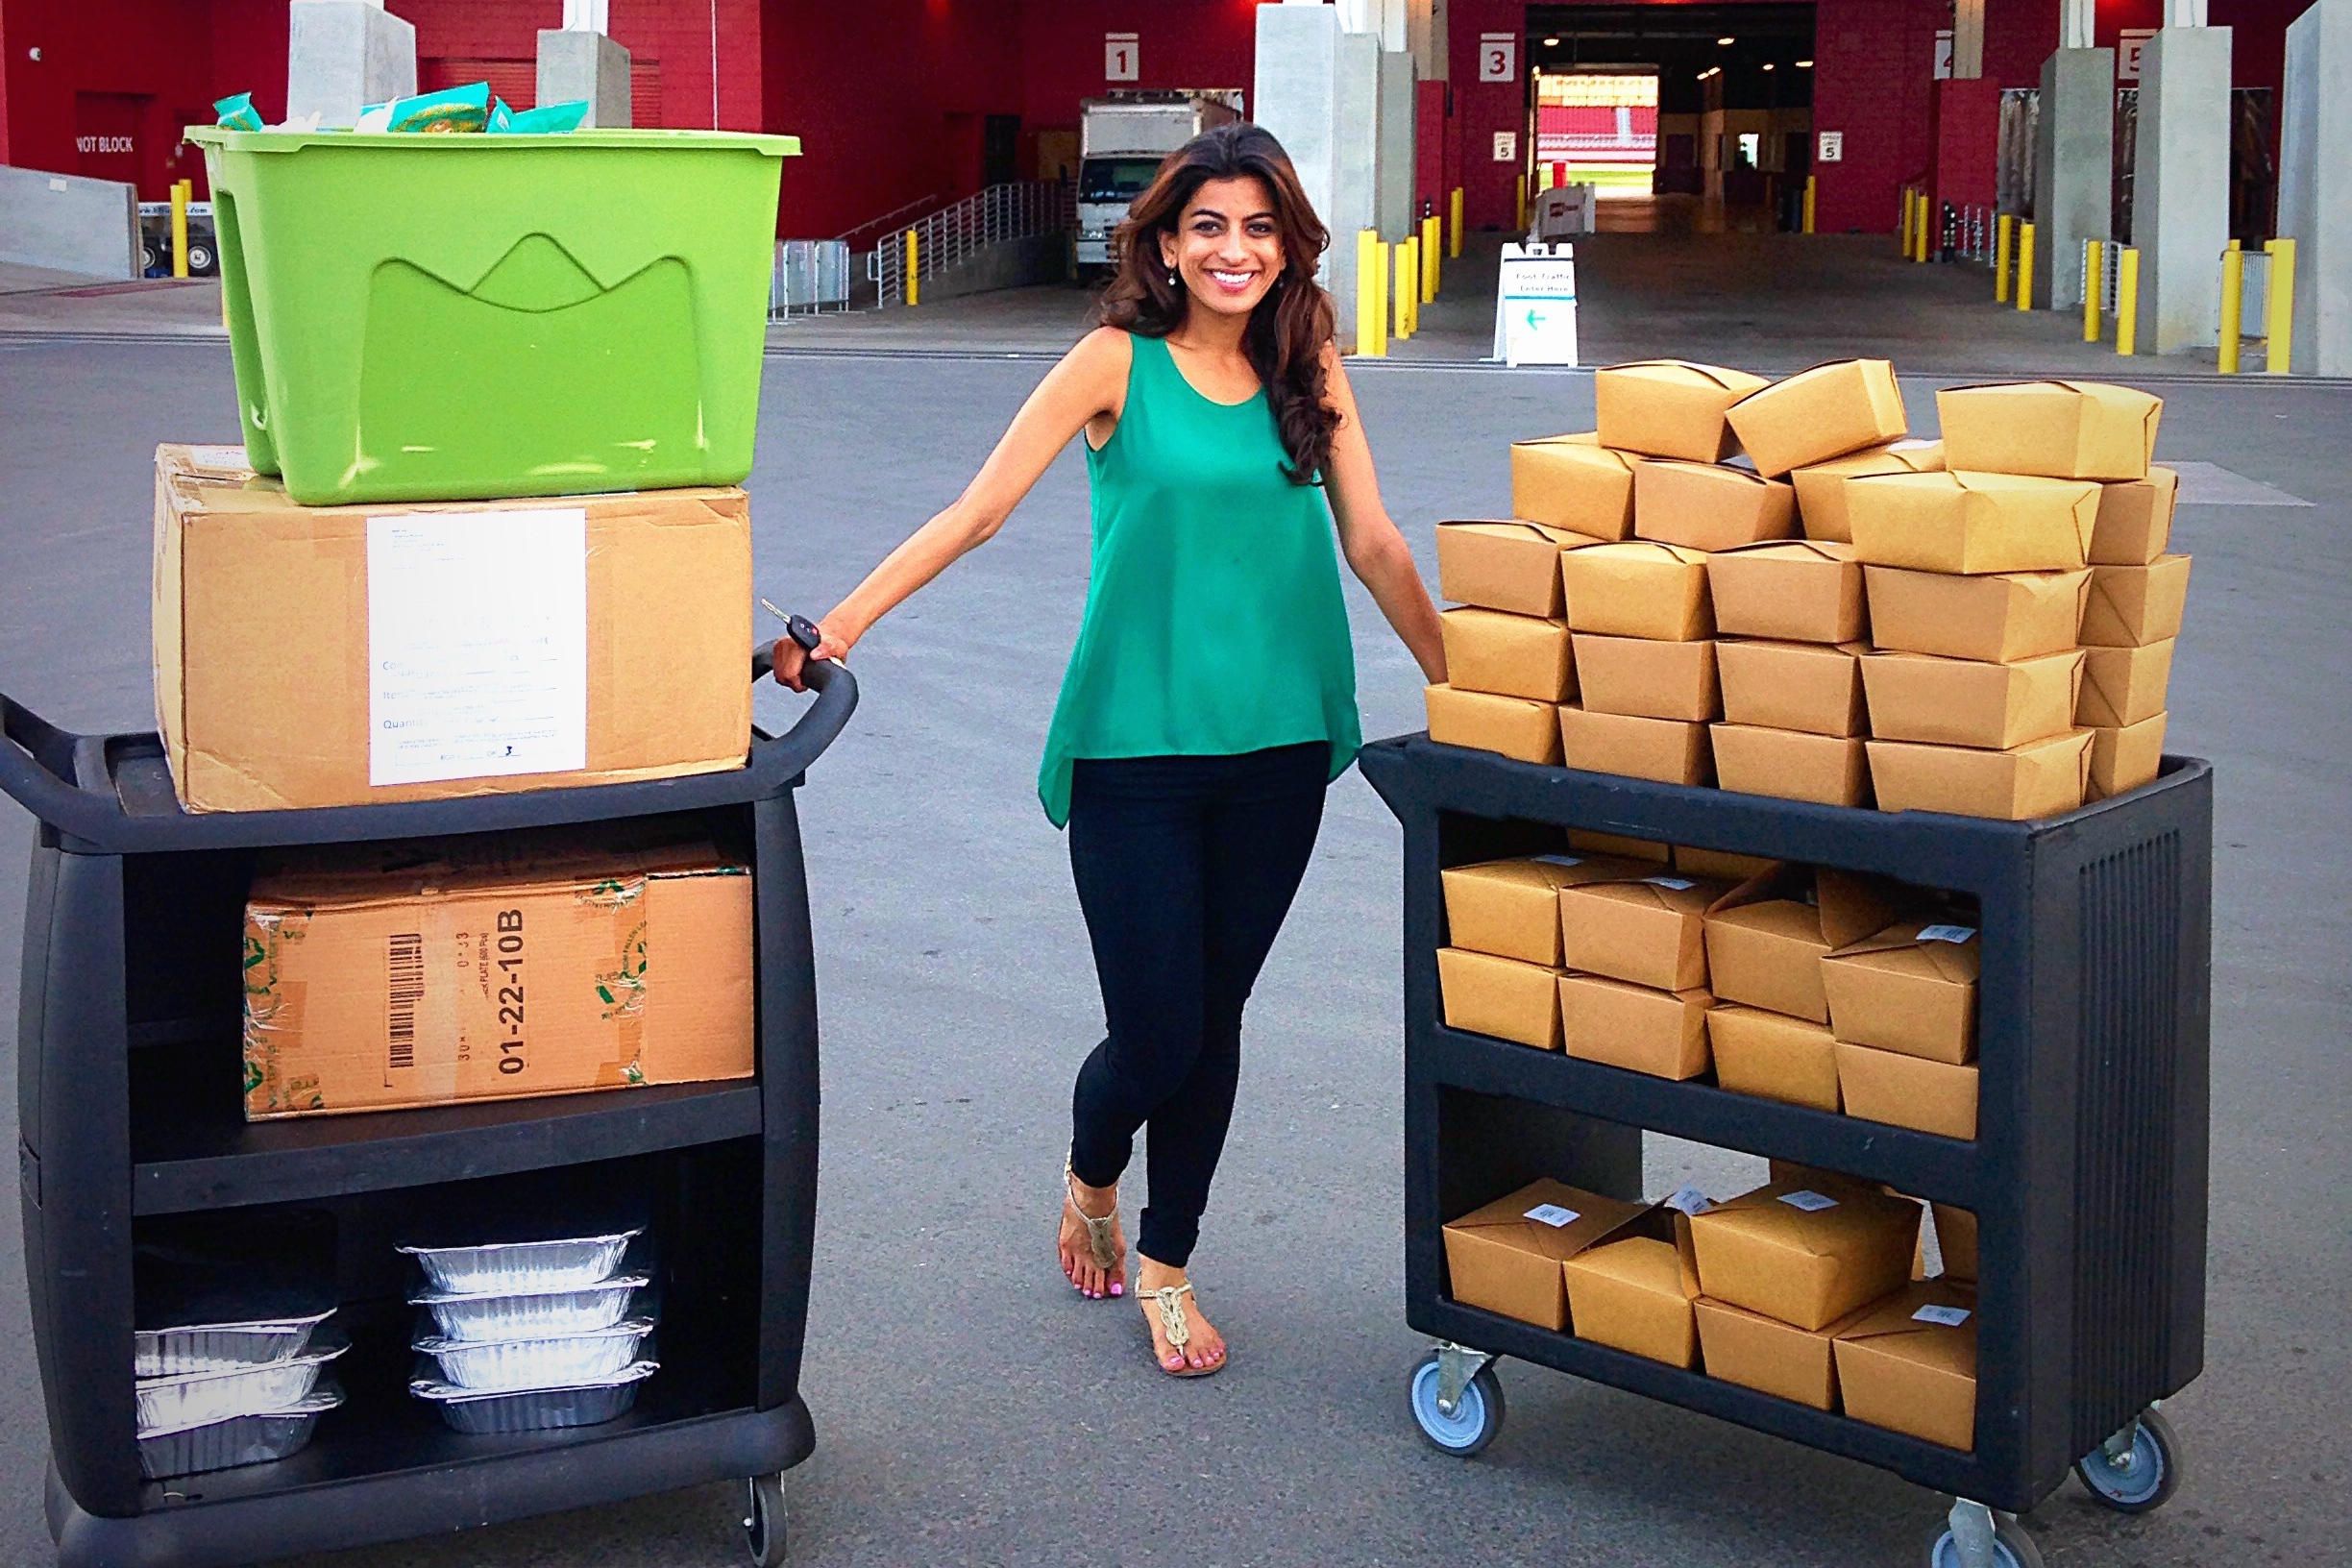 Feed Forward founder Komal with some of the food that would go to waste, had it not been for her app.